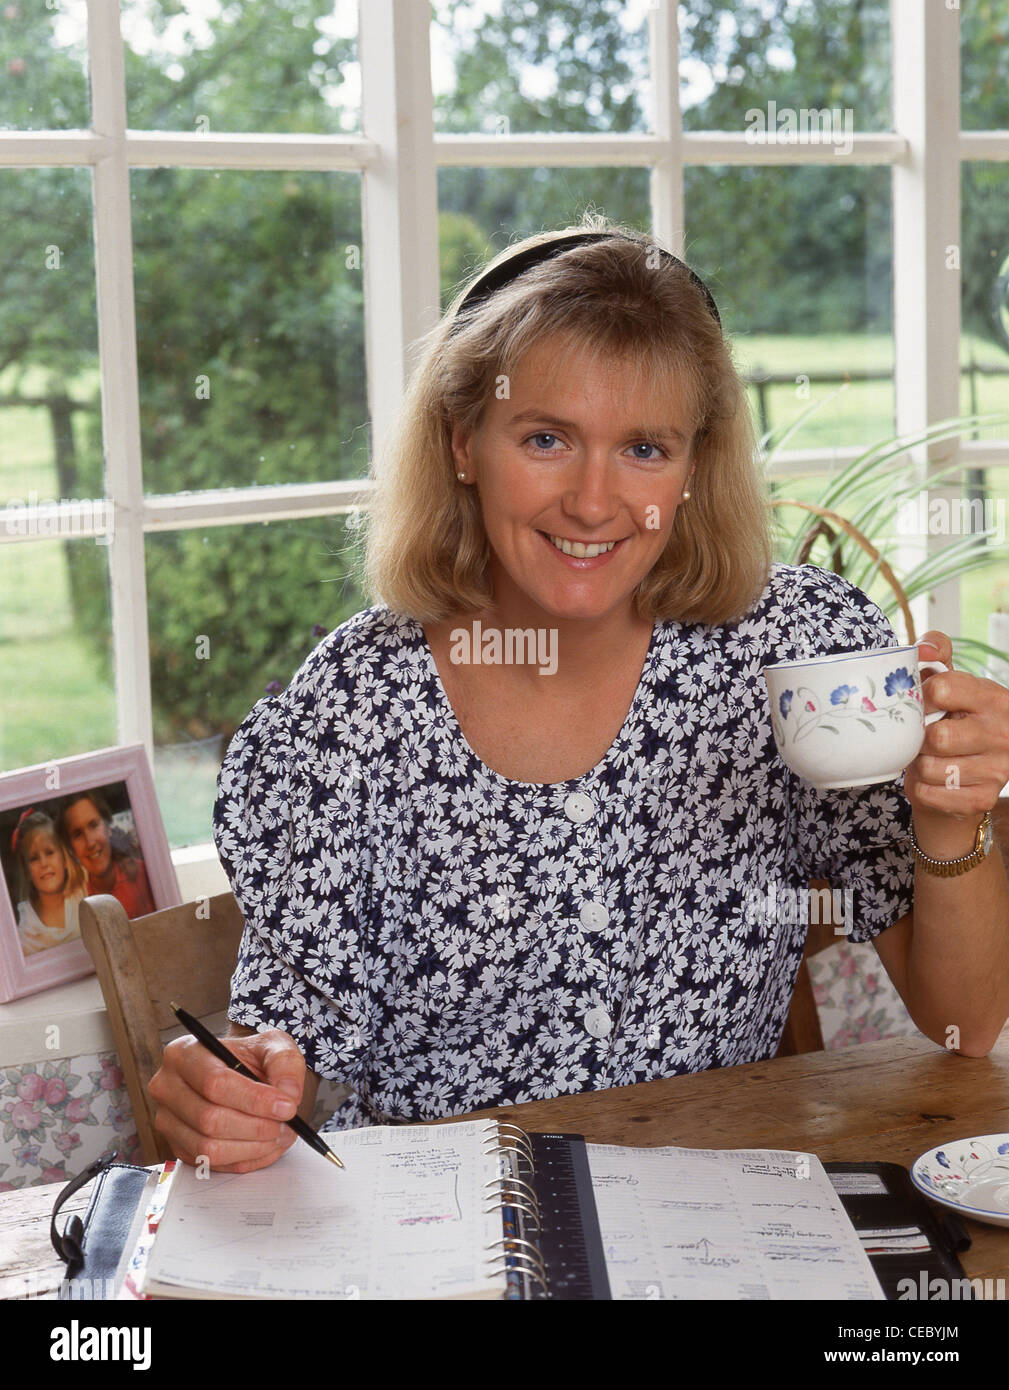 Young woman drinking cup of tea and writing notes, Surrey, England, United Kingdom Stock Photo